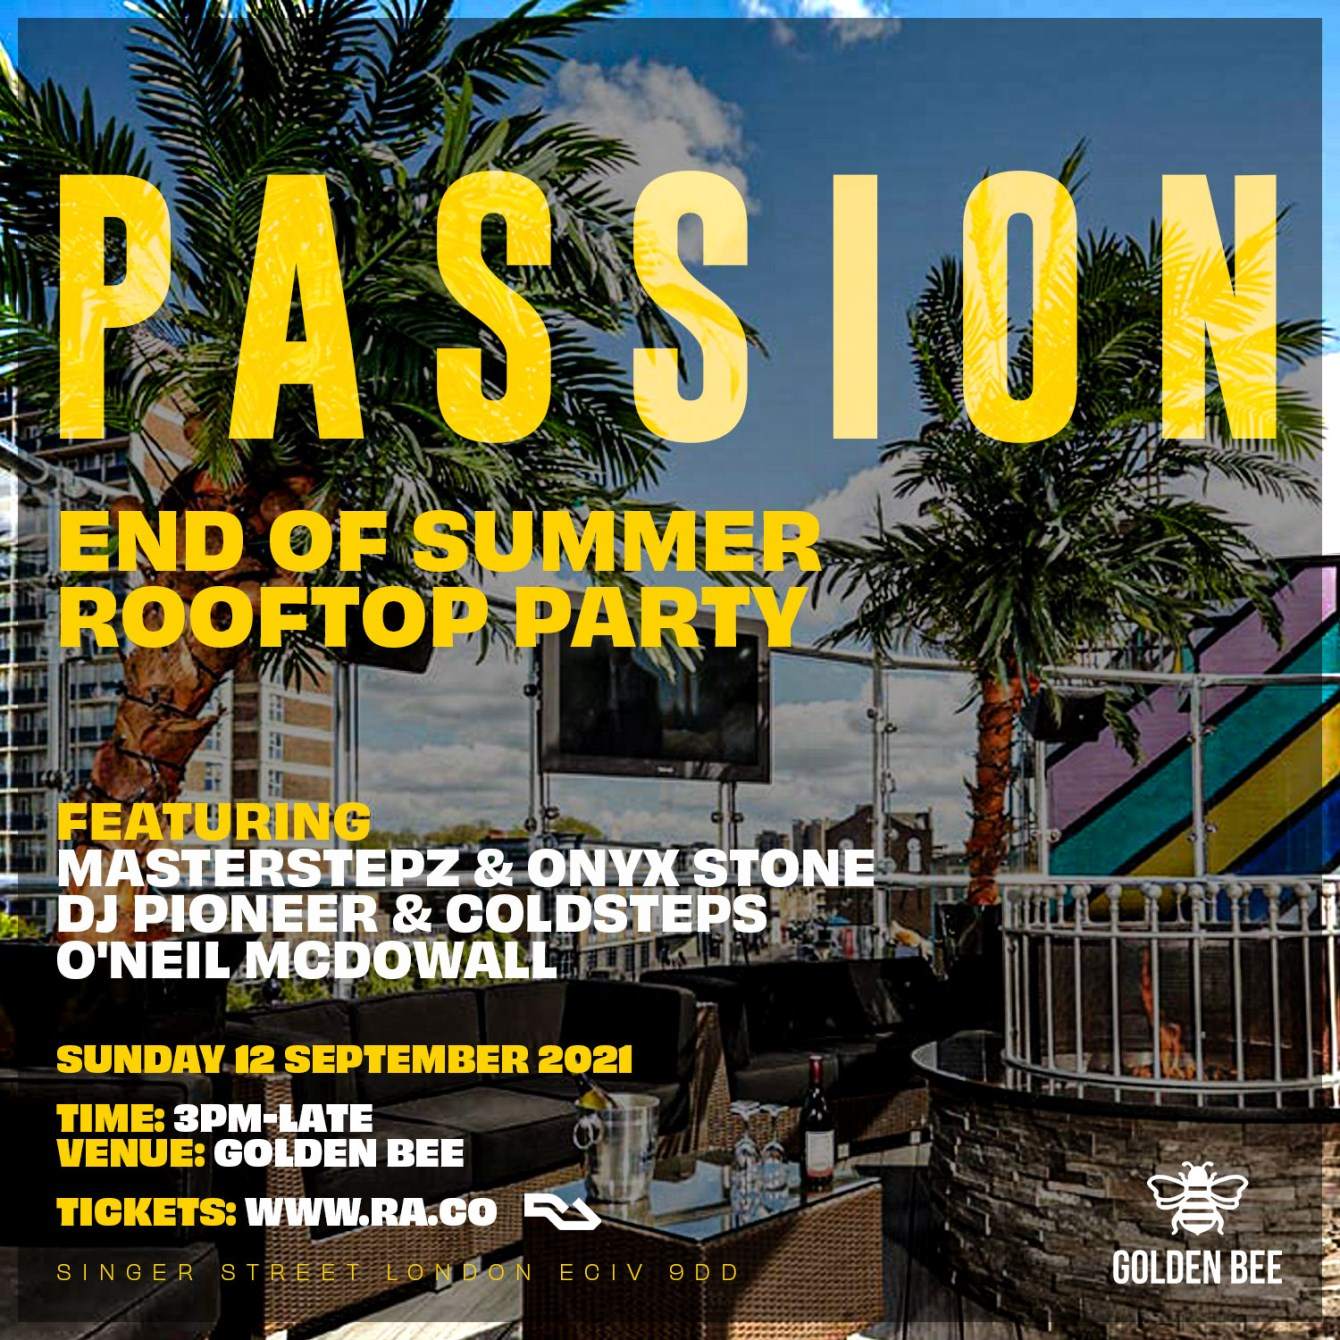 Passion - End Of Summer Rooftop Party - Página trasera